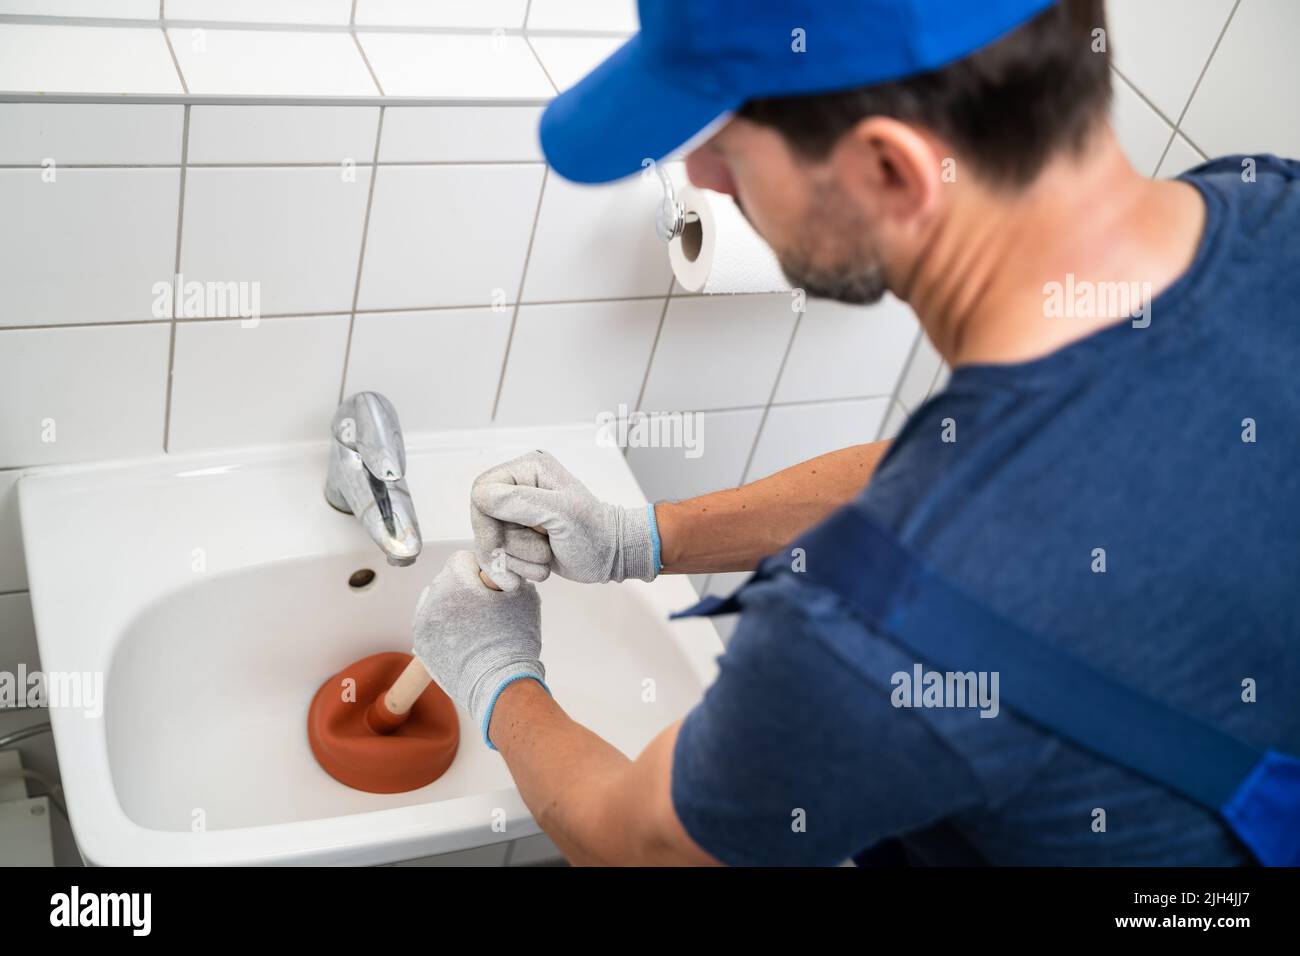 https://c8.alamy.com/comp/2JH4JJ7/clogged-drain-and-blocked-sewer-cleaning-sink-stoppage-fix-2JH4JJ7.jpg